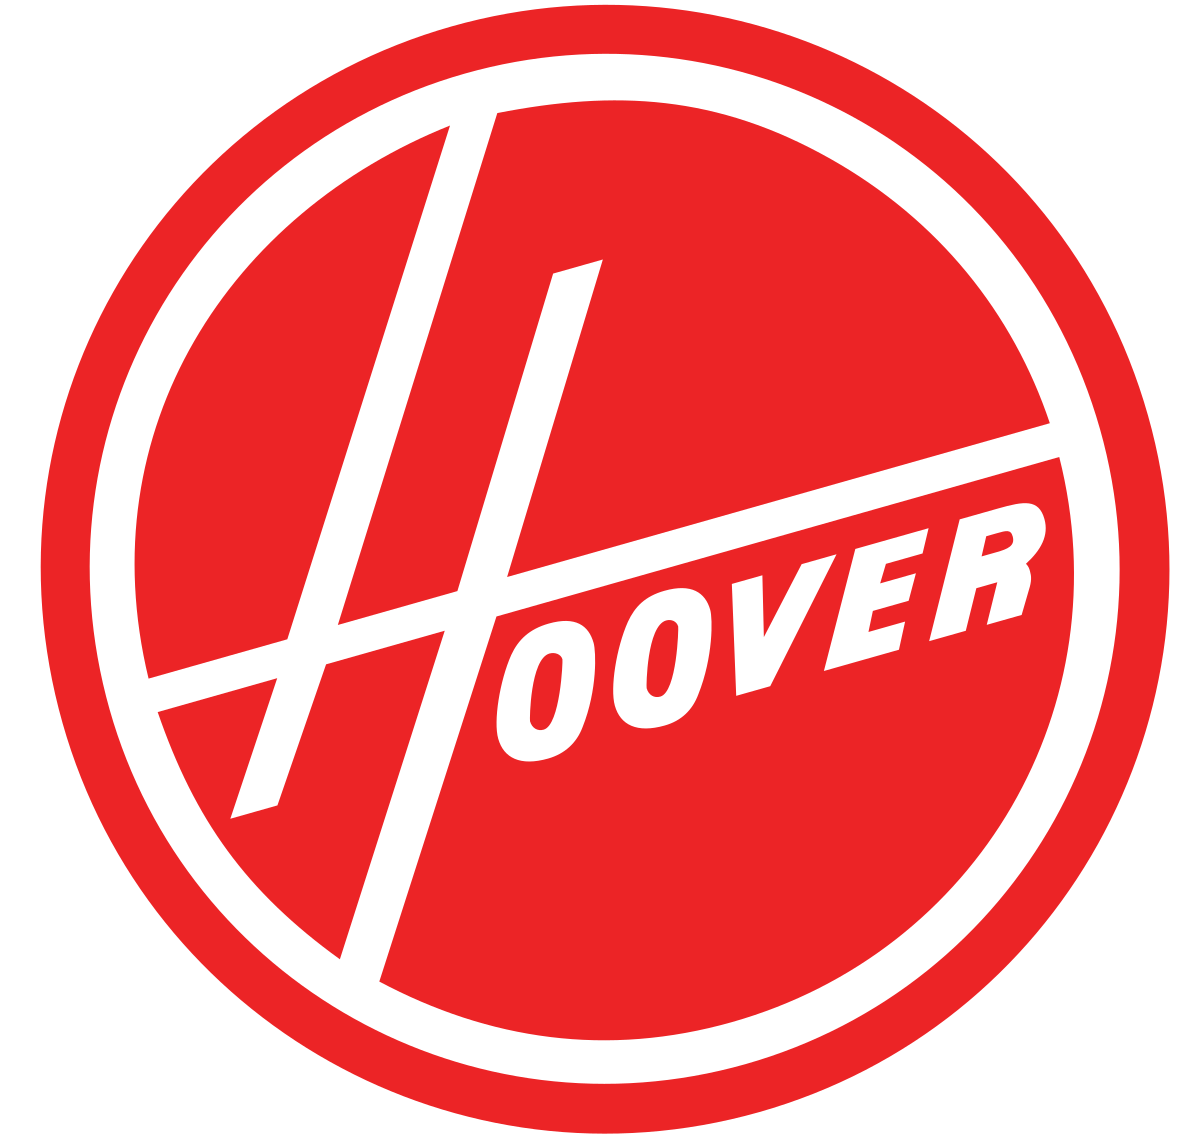 Old Maytag Logo - The Hoover Company